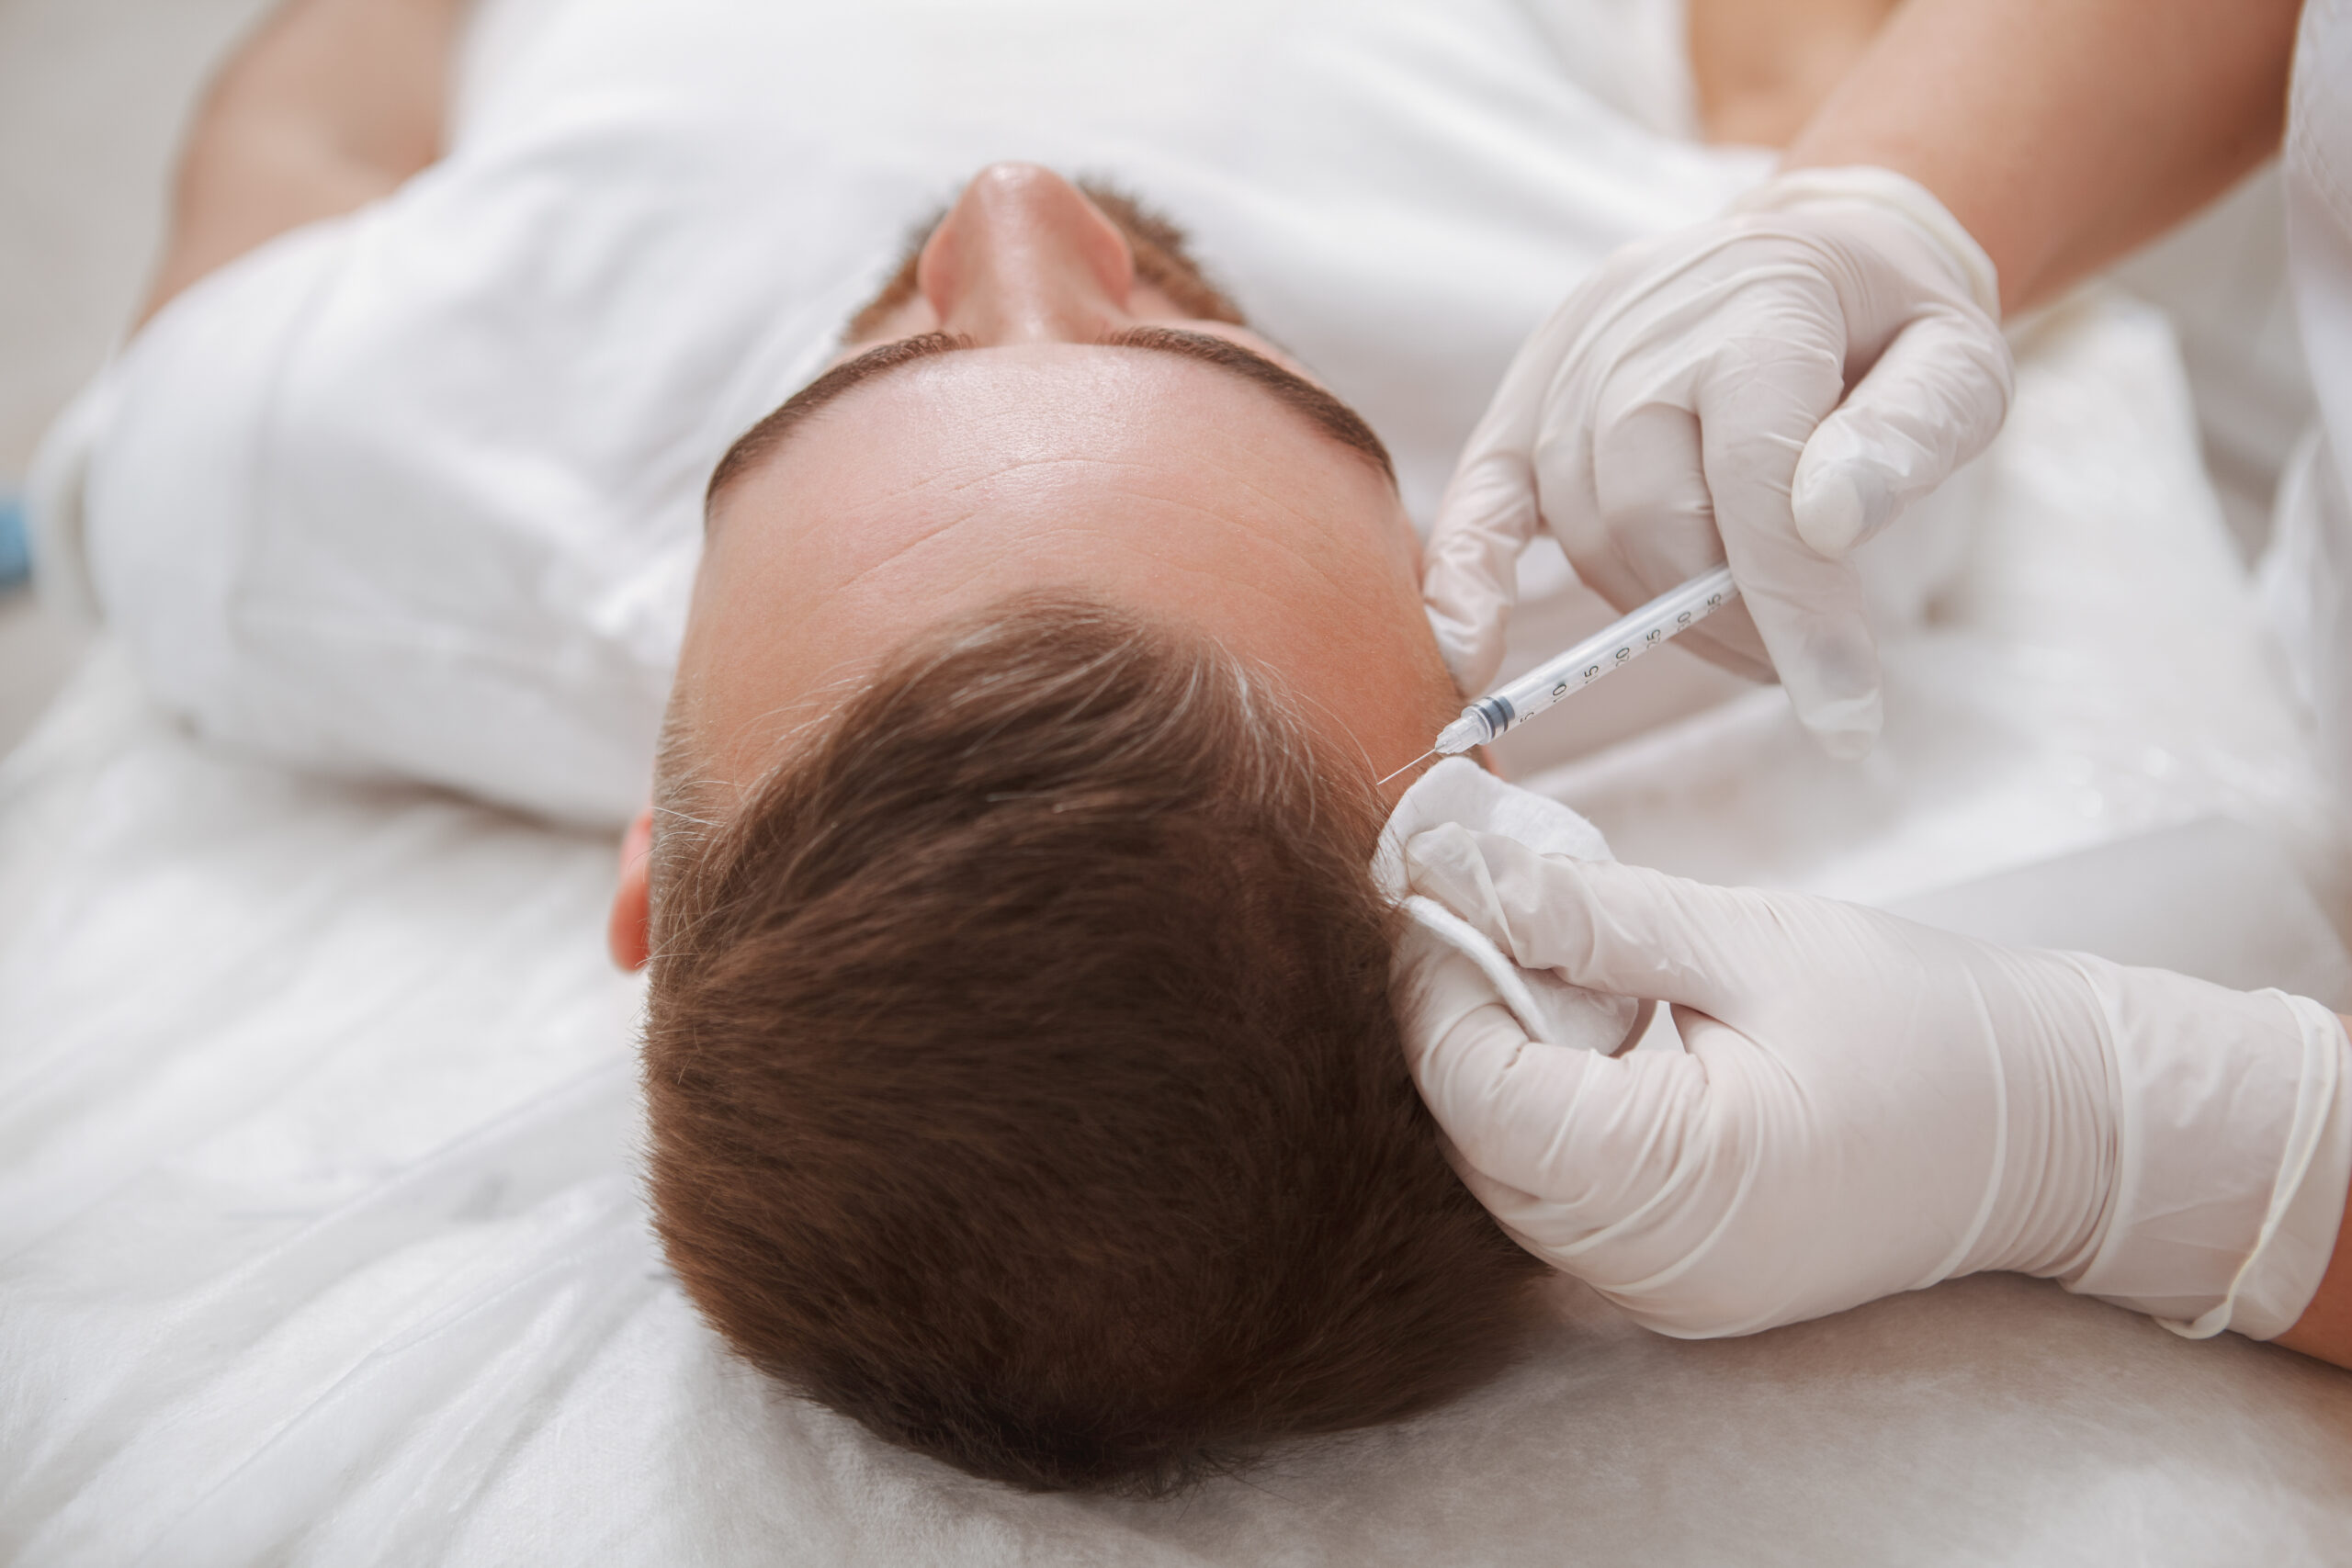 Man receiving injections to the scalp to promote hair regrowth